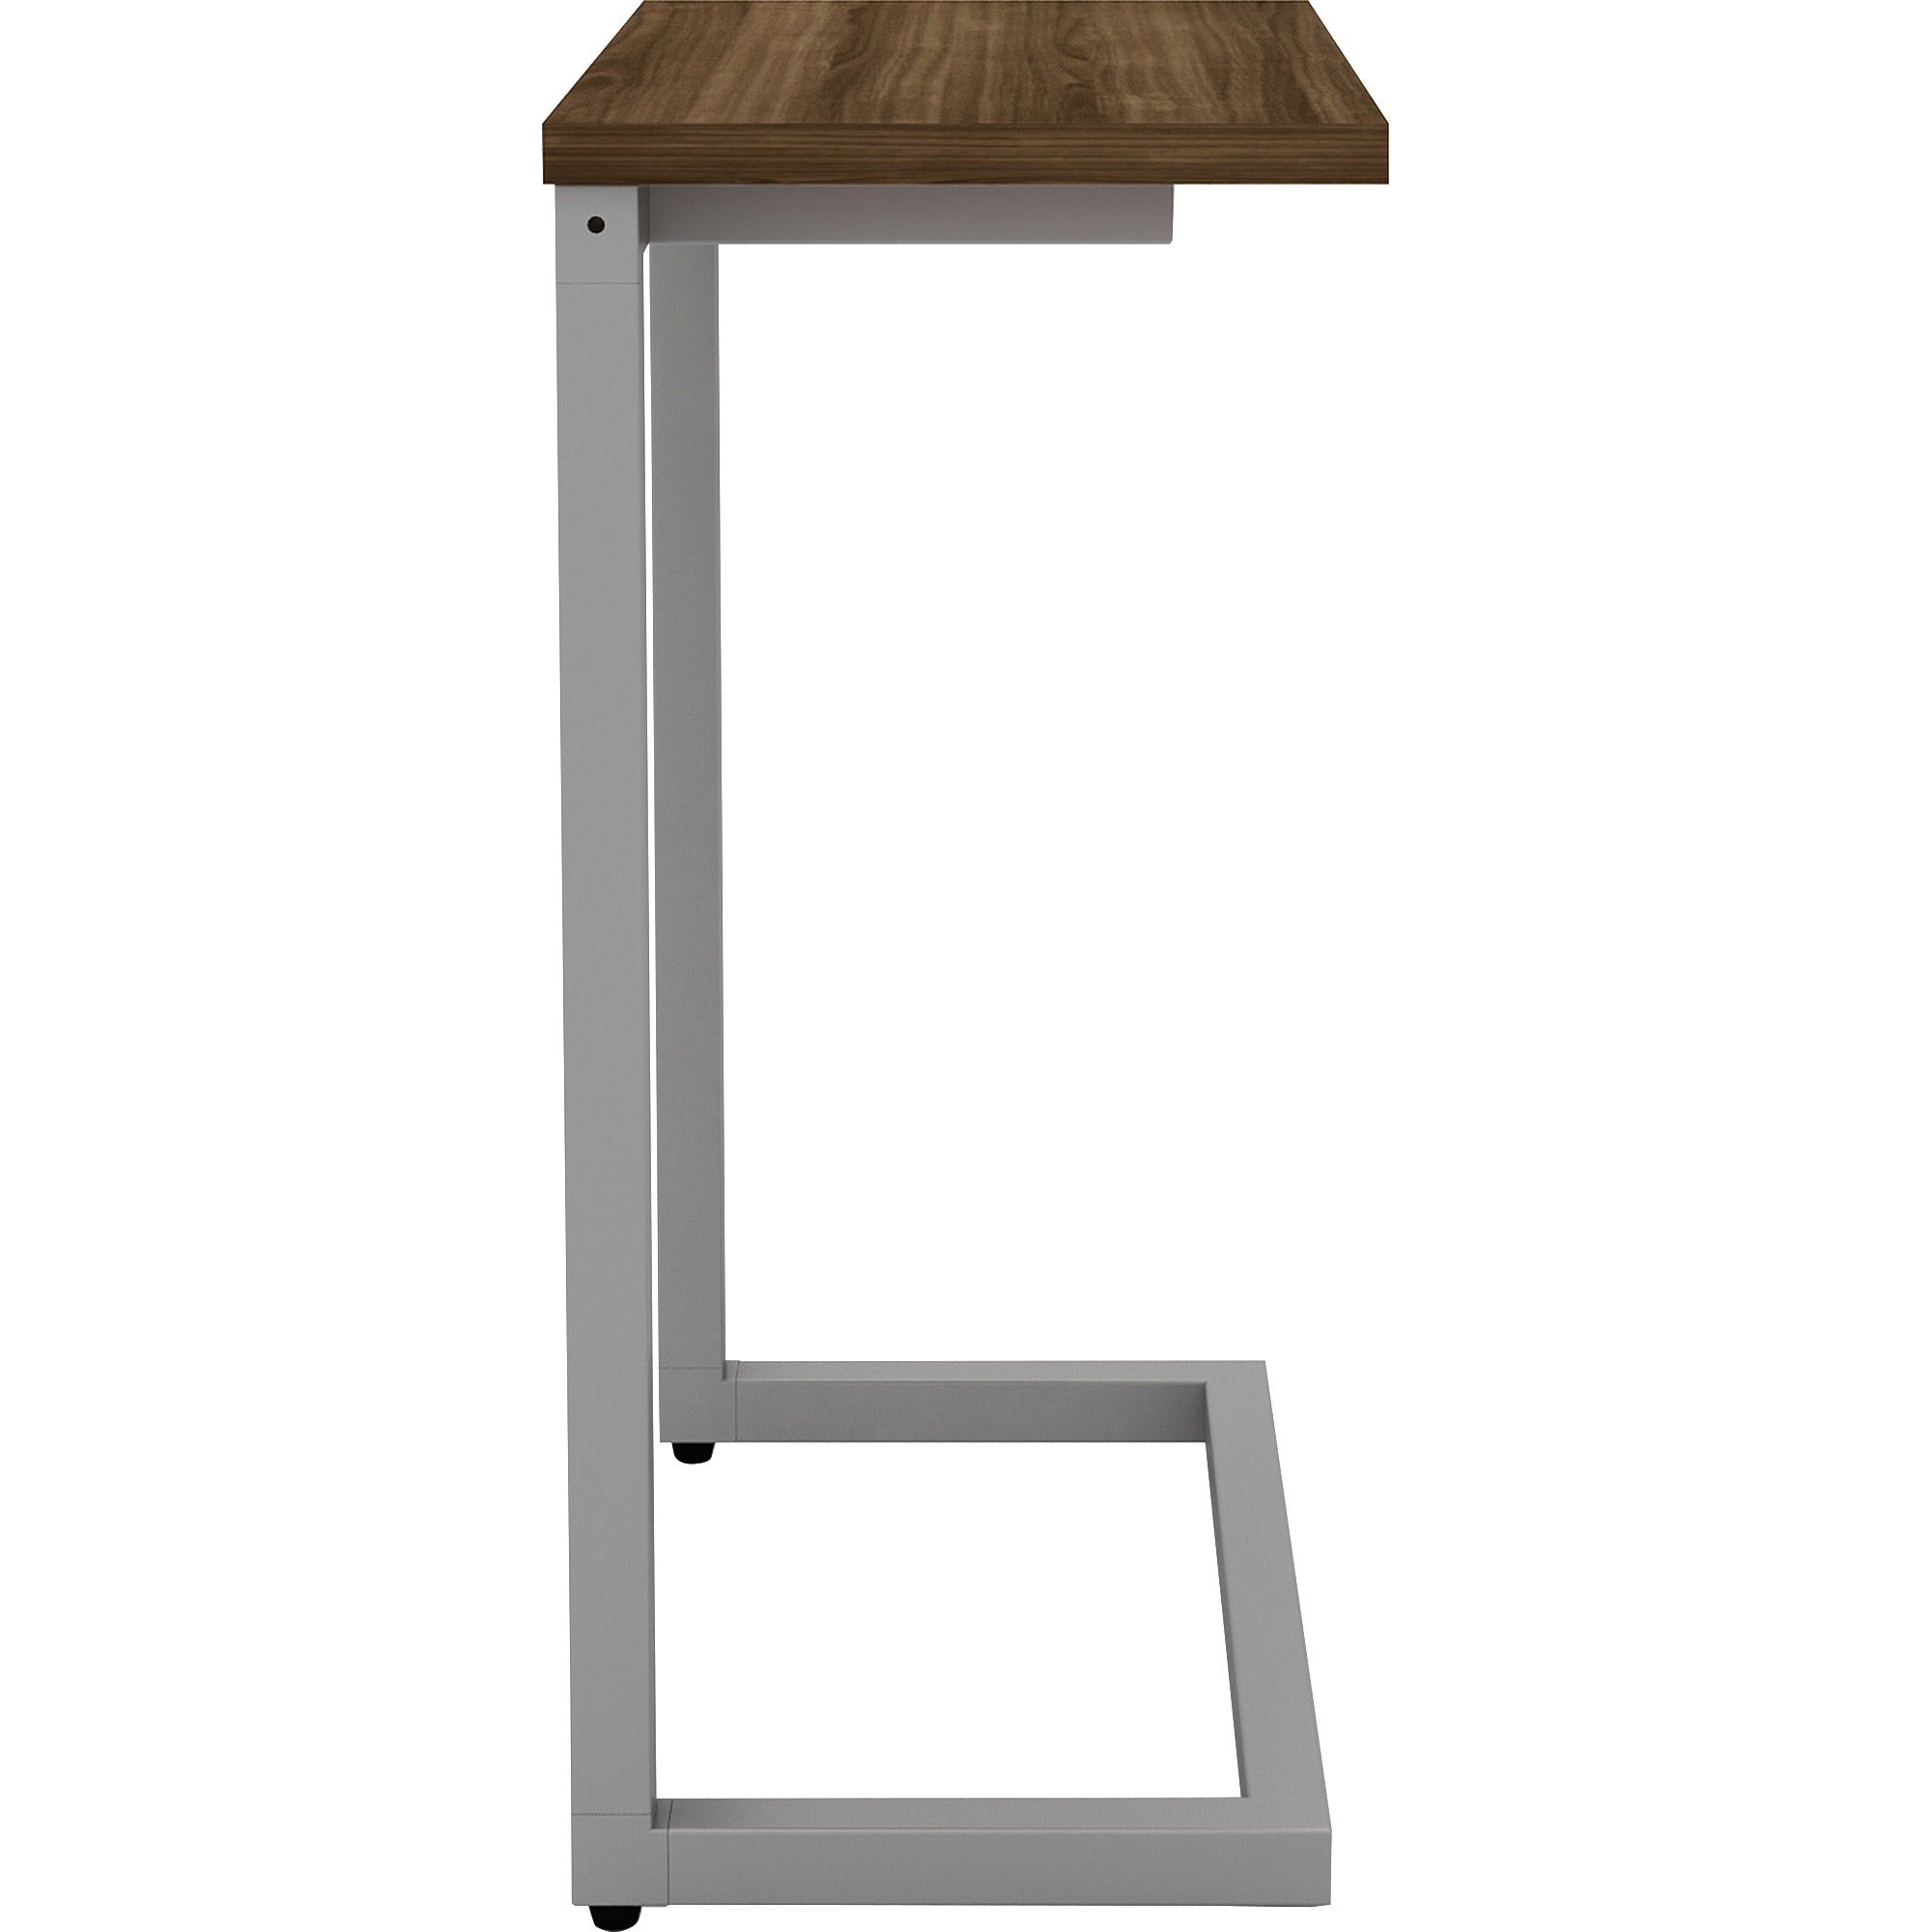 lorell-quintessence-collection-cantilever-table-for-table-topwalnut-rectangle-top-cantilever-base-990-table-top-length-x-1740-table-top-width-2650-height-assembly-required-1-each_llr86928 - 2